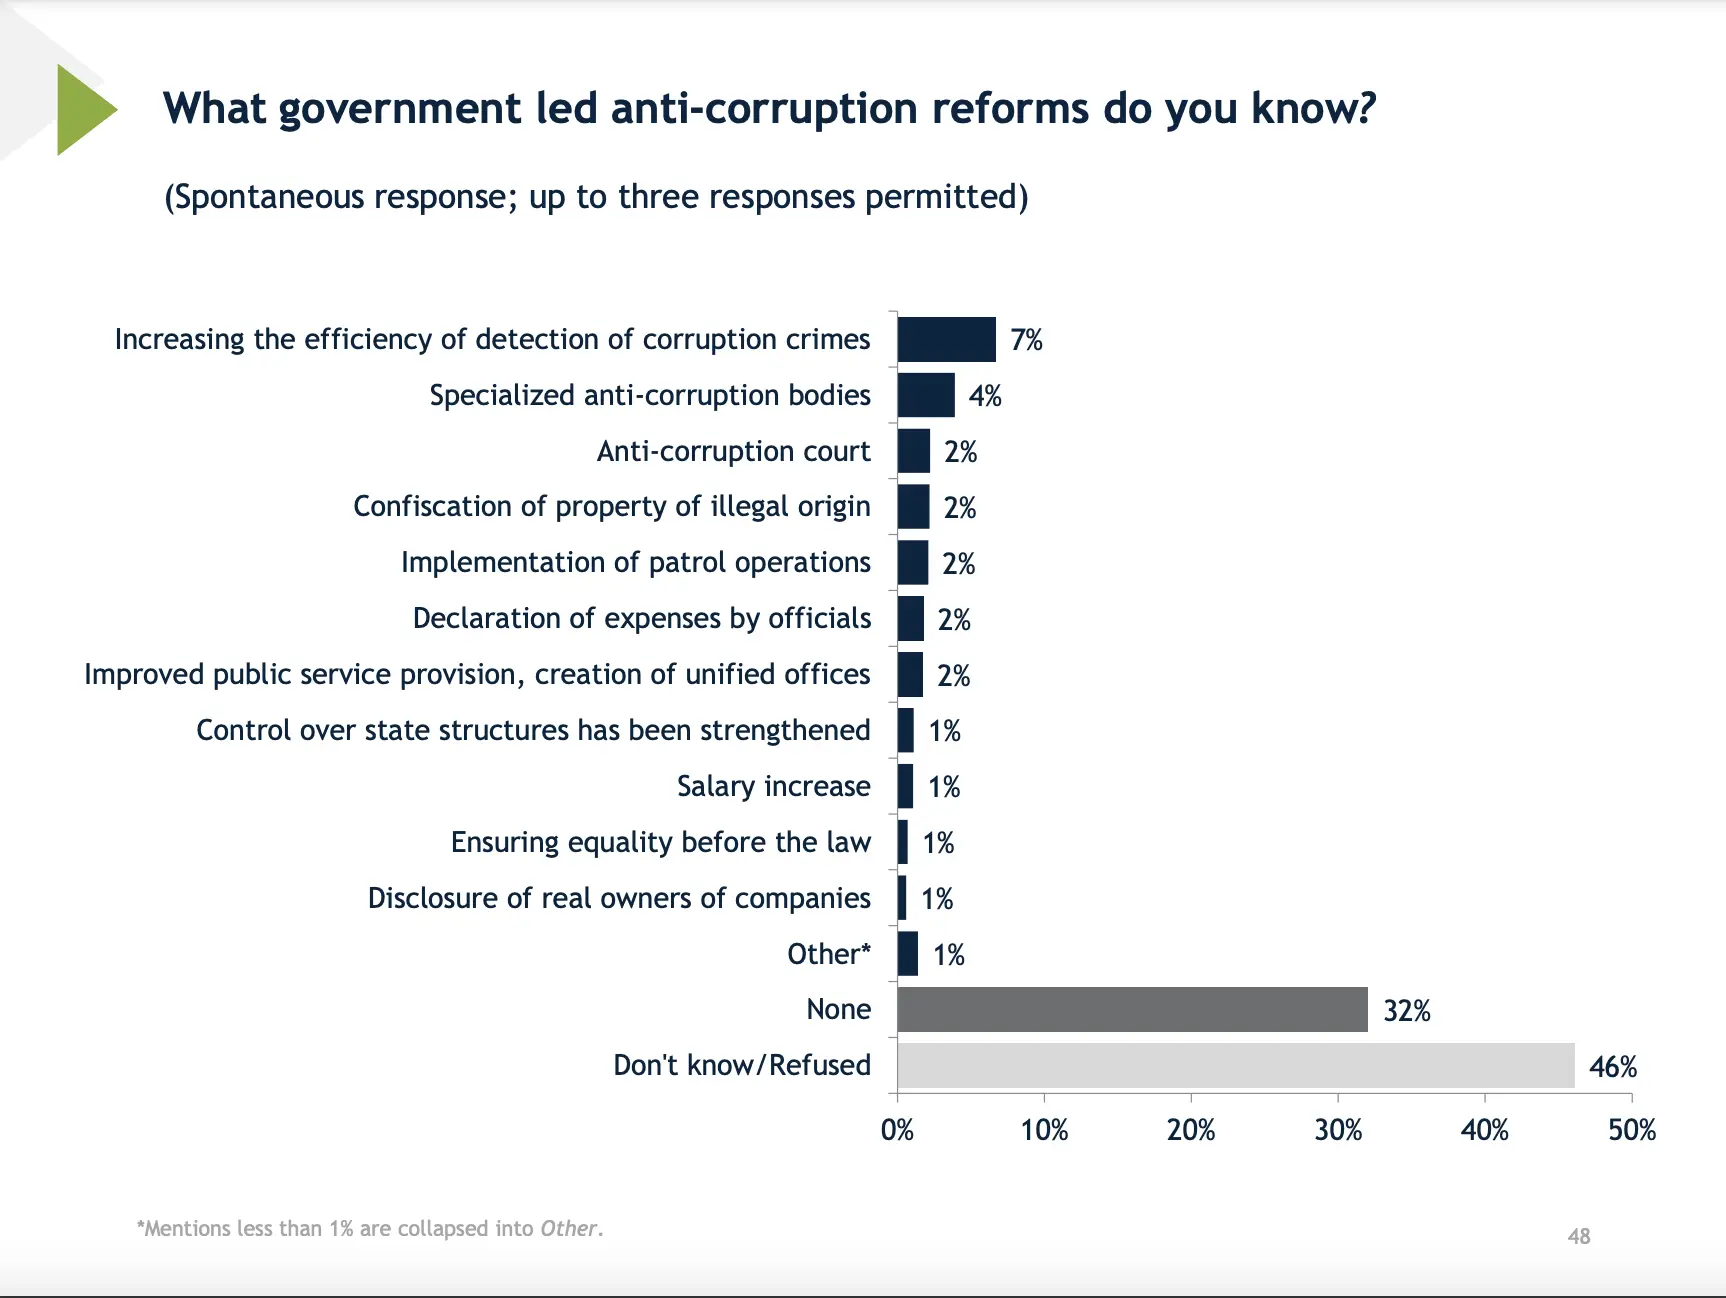 What Anti-corruption Reforms do you know